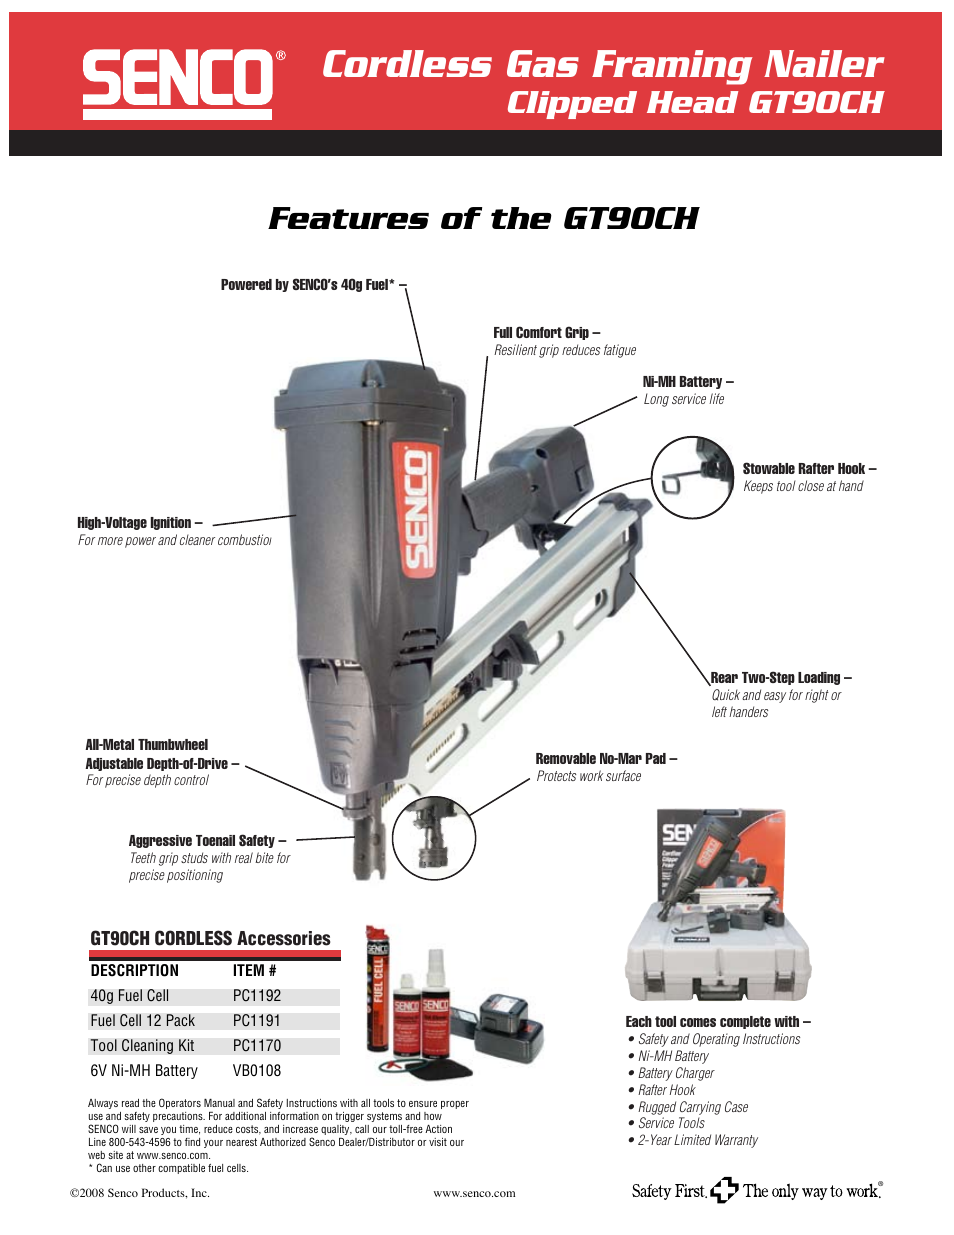 Cordless gas framing nailer, Features of the gt90ch, Clipped head gt90ch | Senco  GT90CH User Manual | Page 2 / 2